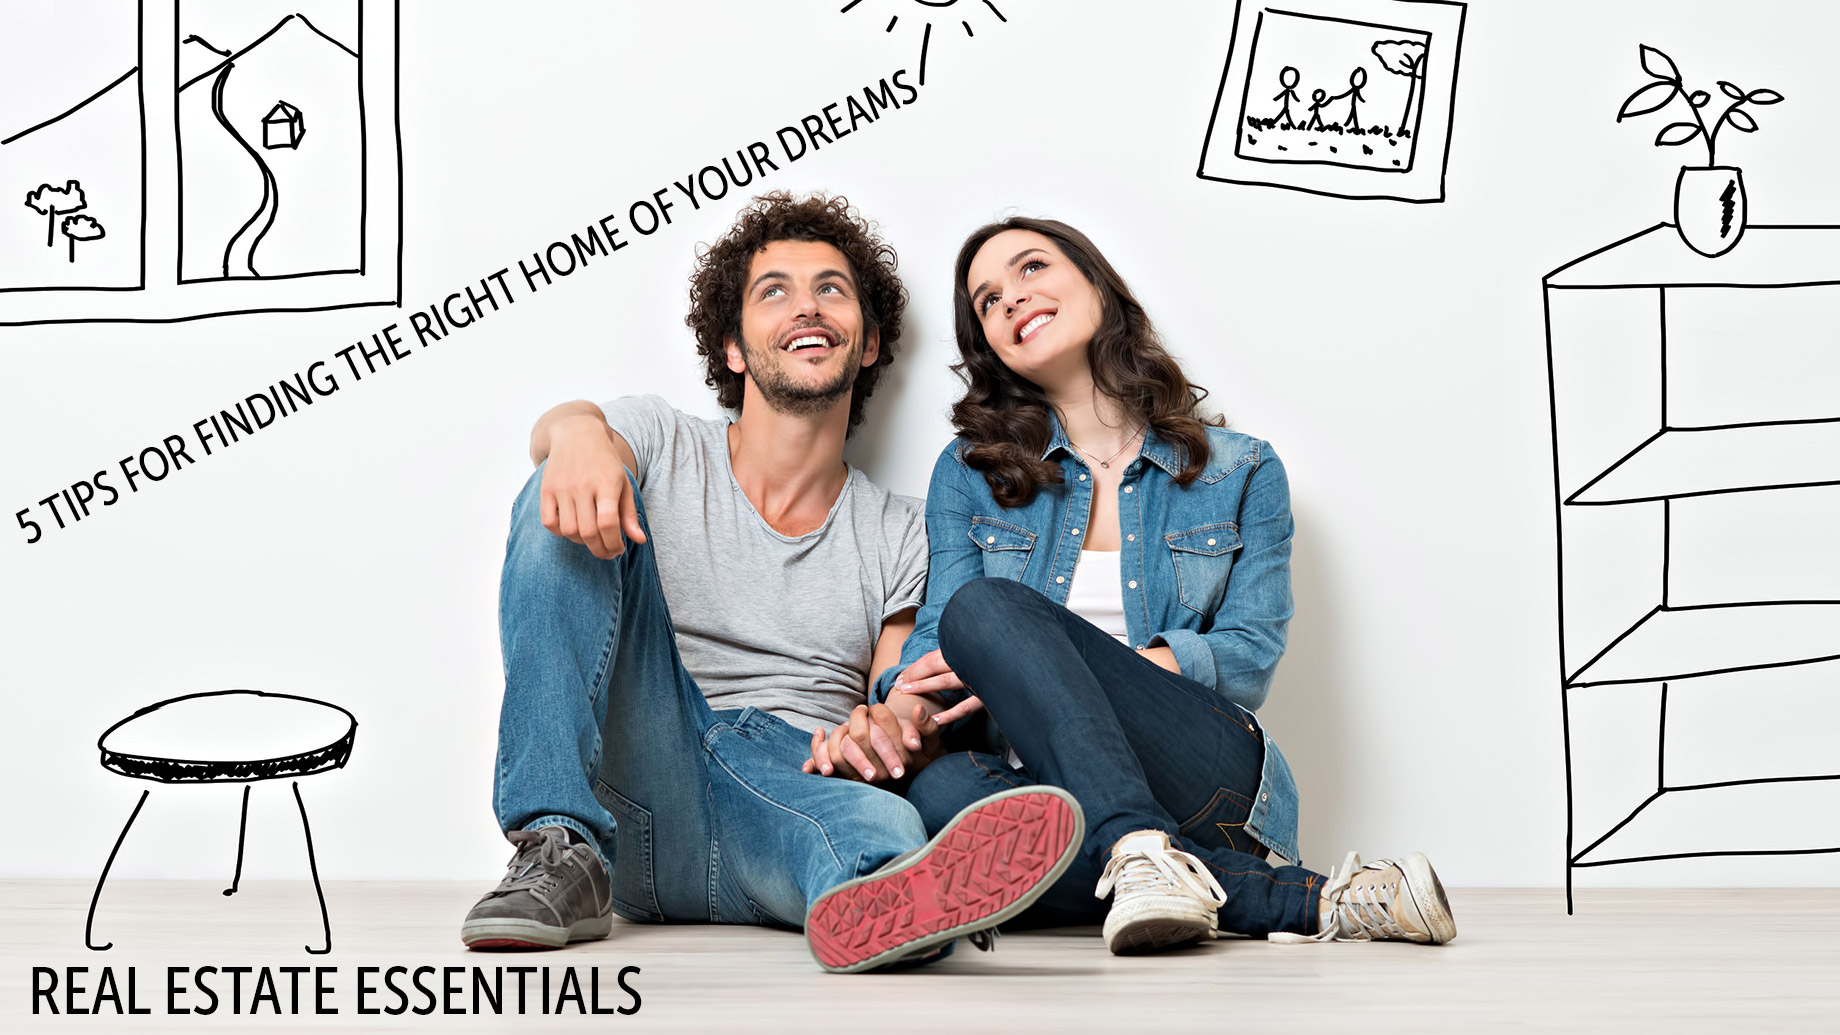 Real Estate Essentials - 5 Tips for Finding the Right Home of Your Dreams